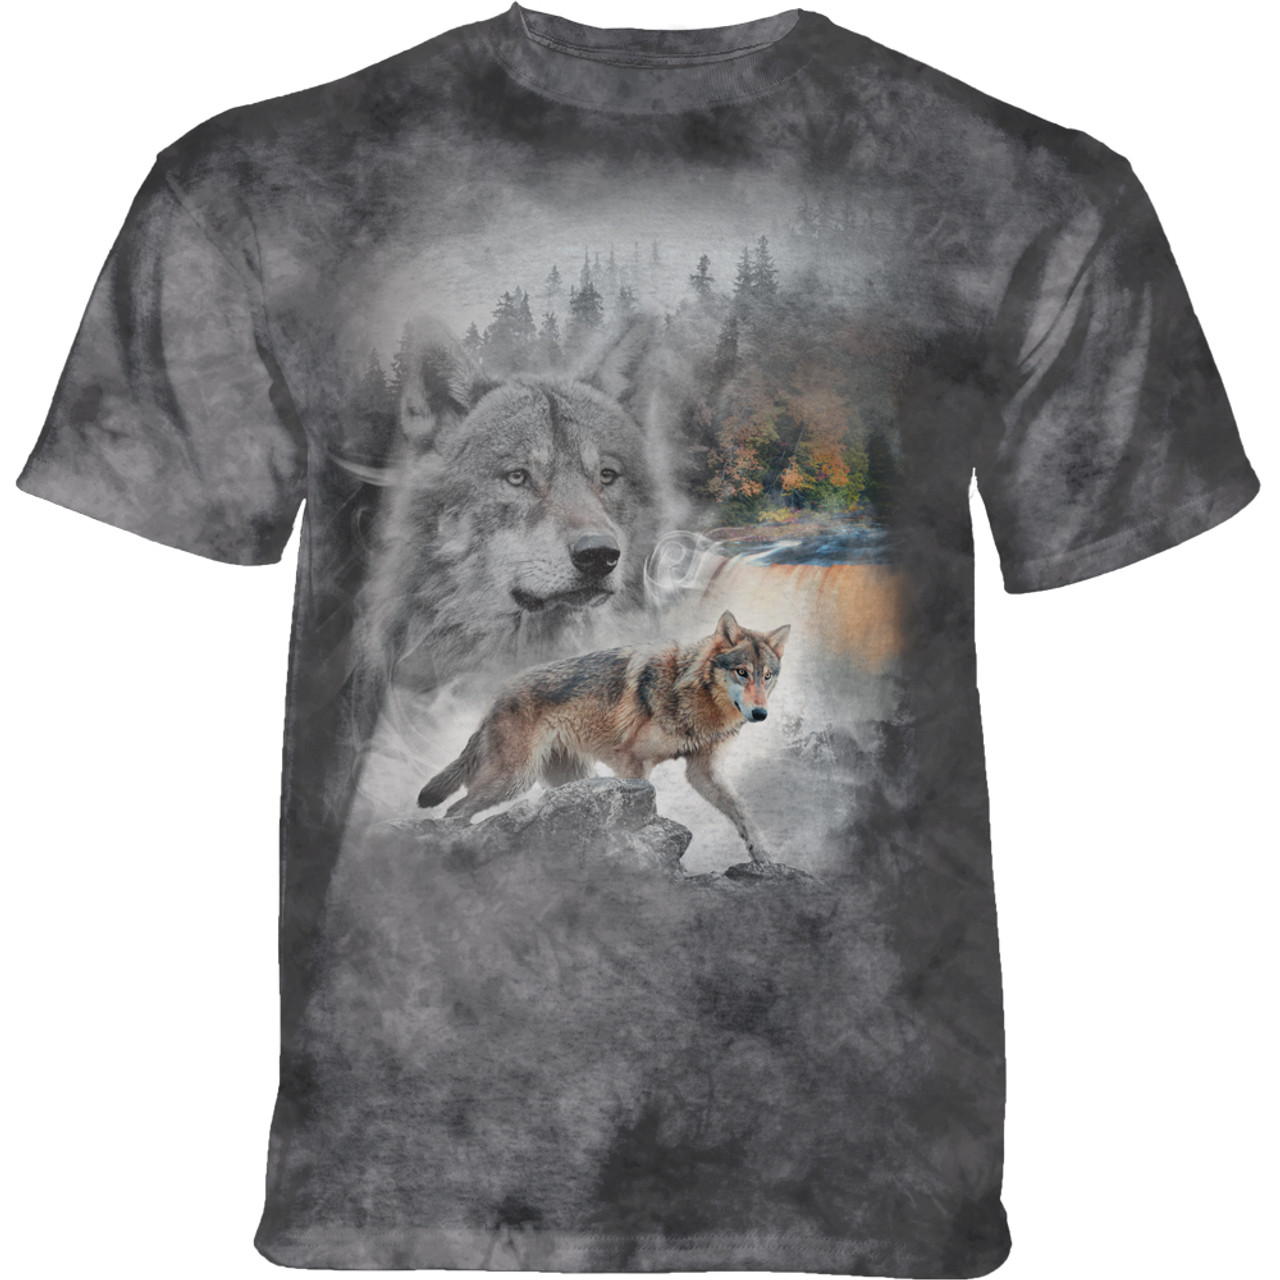 North American T Shirts Online, The Mountain Company T Shirts - The ...